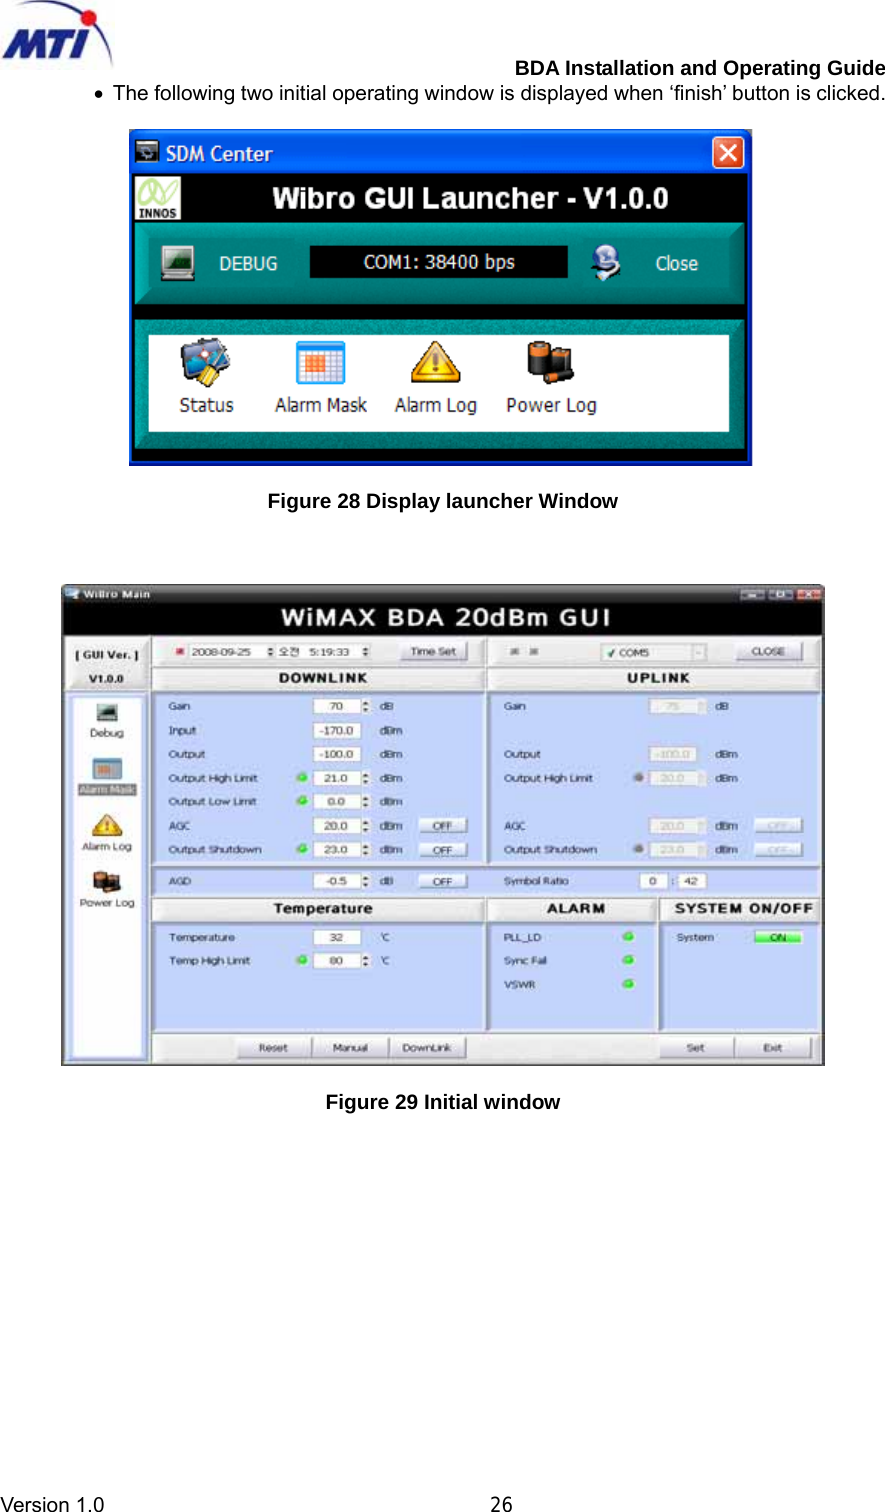         BDA Installation and Operating Guide Version 1.0                                       26 •  The following two initial operating window is displayed when ‘finish’ button is clicked.    Figure 28 Display launcher Window      Figure 29 Initial window              